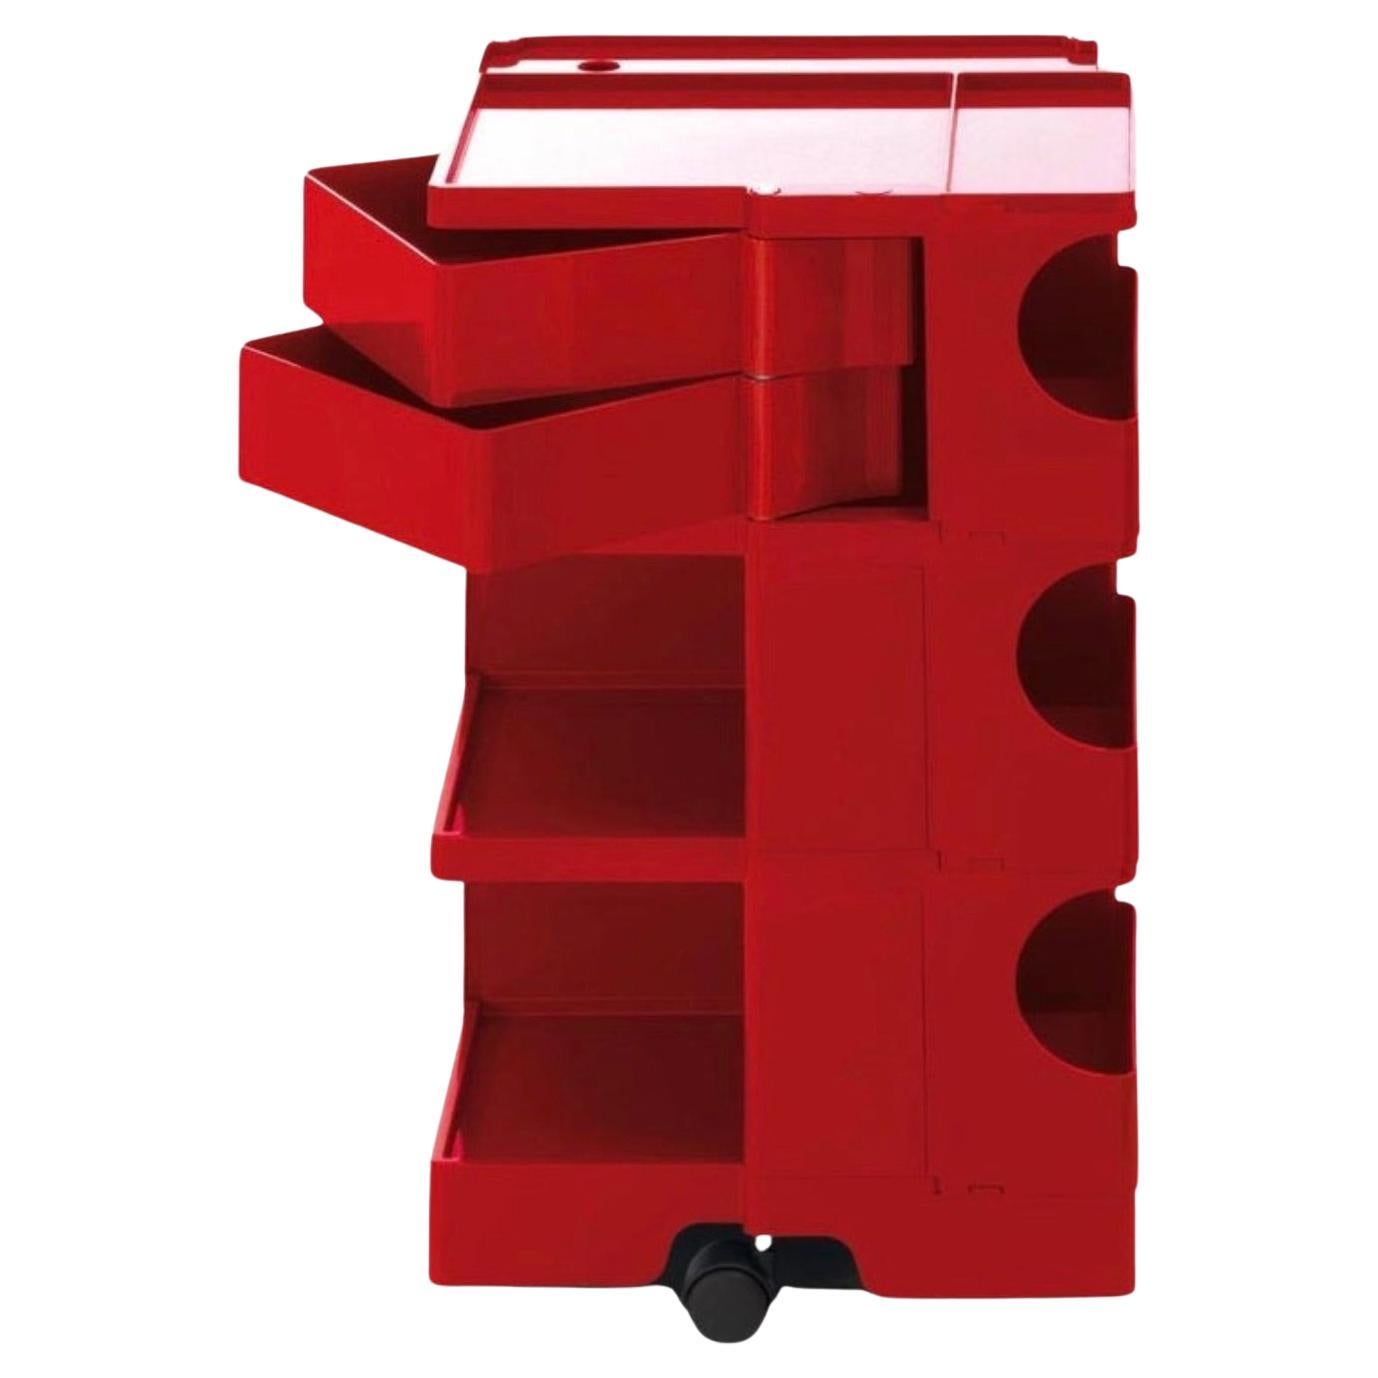 Joe Colombo 'Boby' Trolley 1970 Size M with 2 Drawers in Red for B-Line For Sale